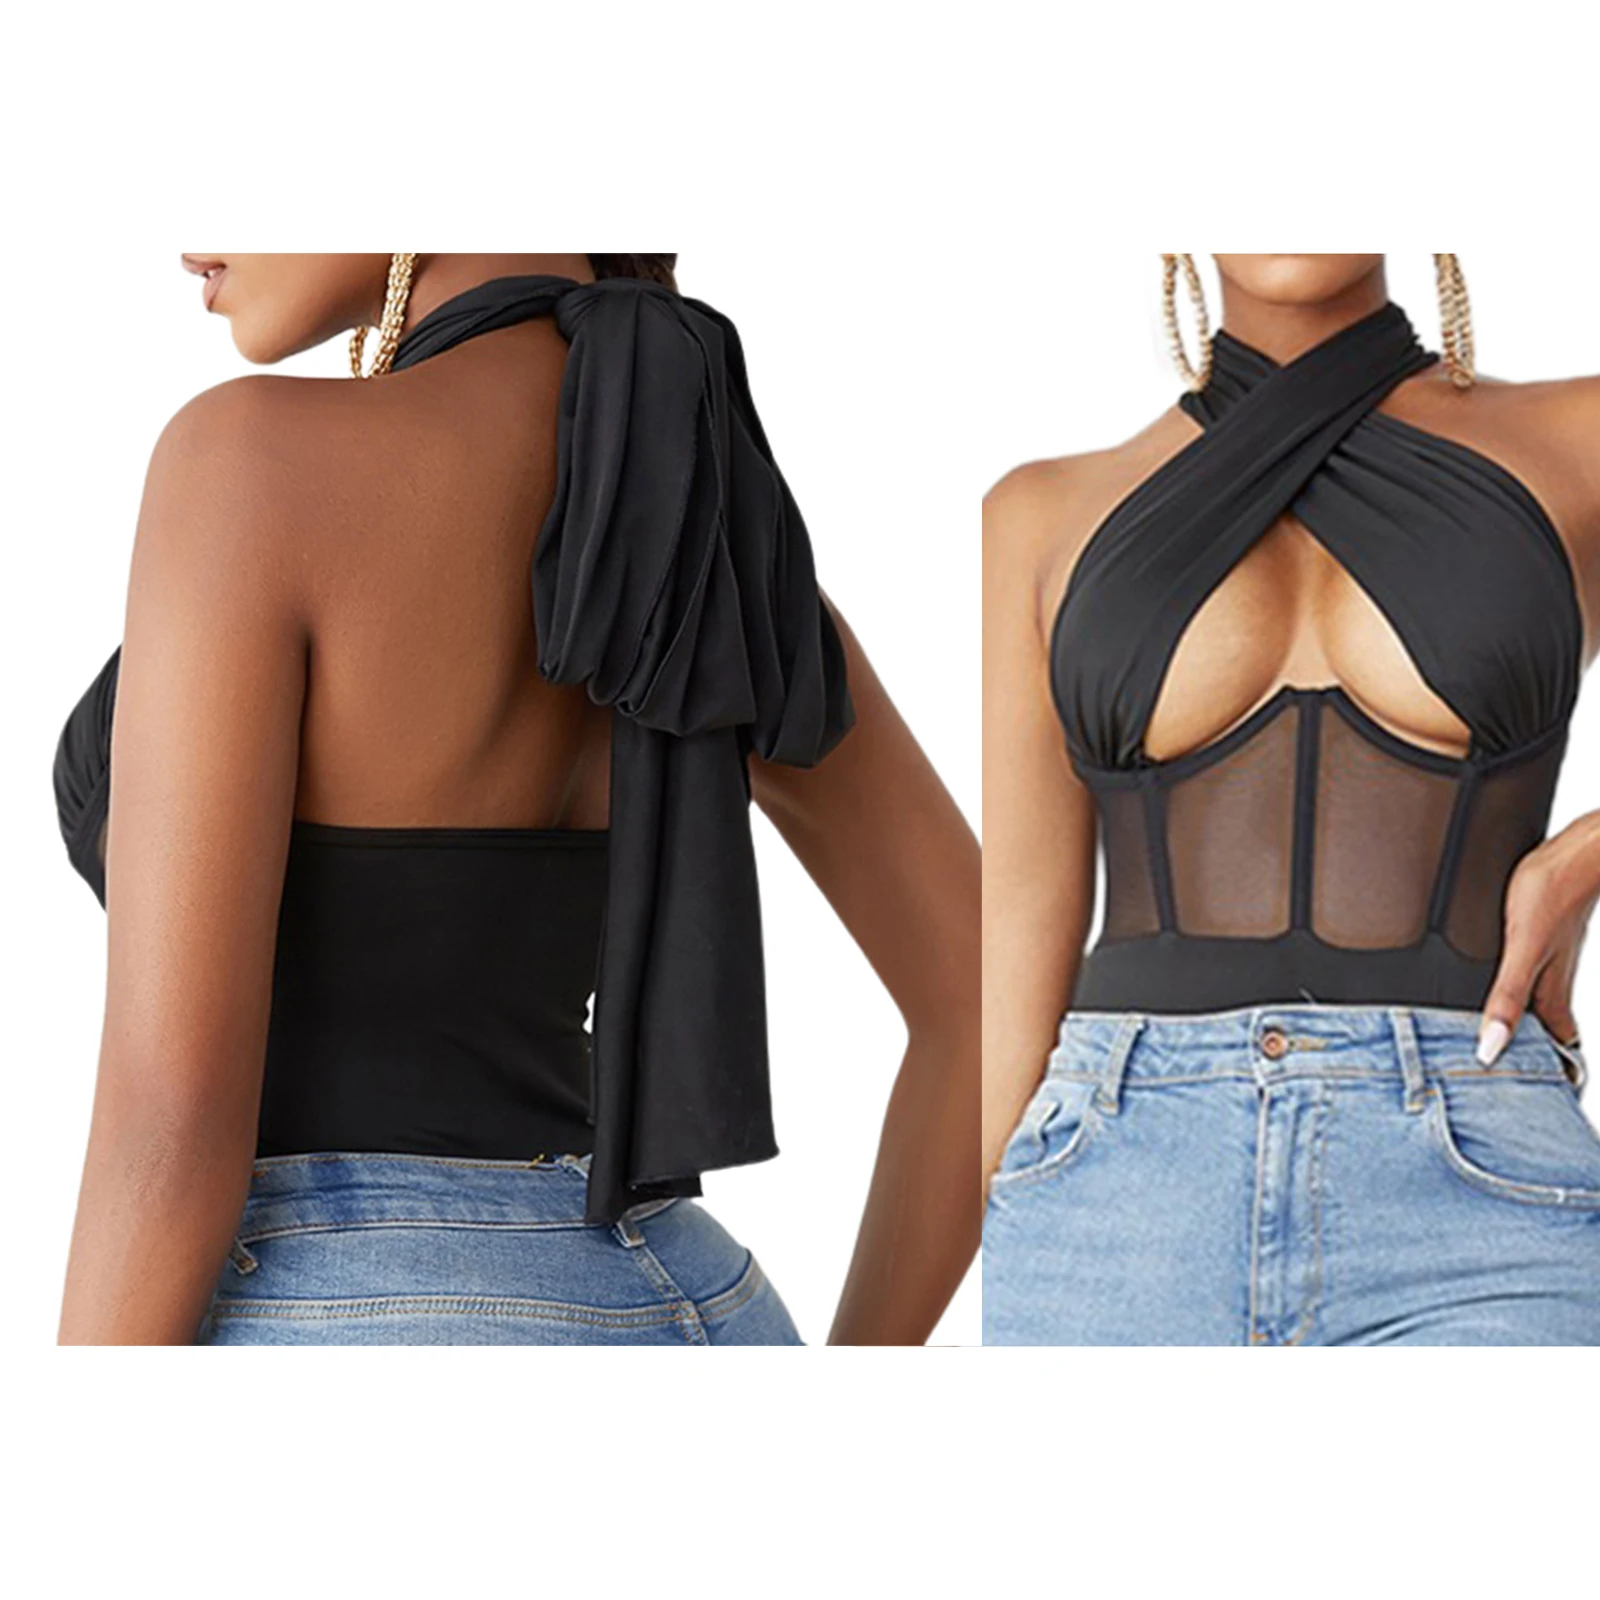 bikini cover up skirt Women Sexy Hollow Out Bodysuit,Black Solid Color Halter Neck Backless Wrapped Chest Stitching Mesh Slim Bodysuit,S/ M/ L bathing suit wrap skirt